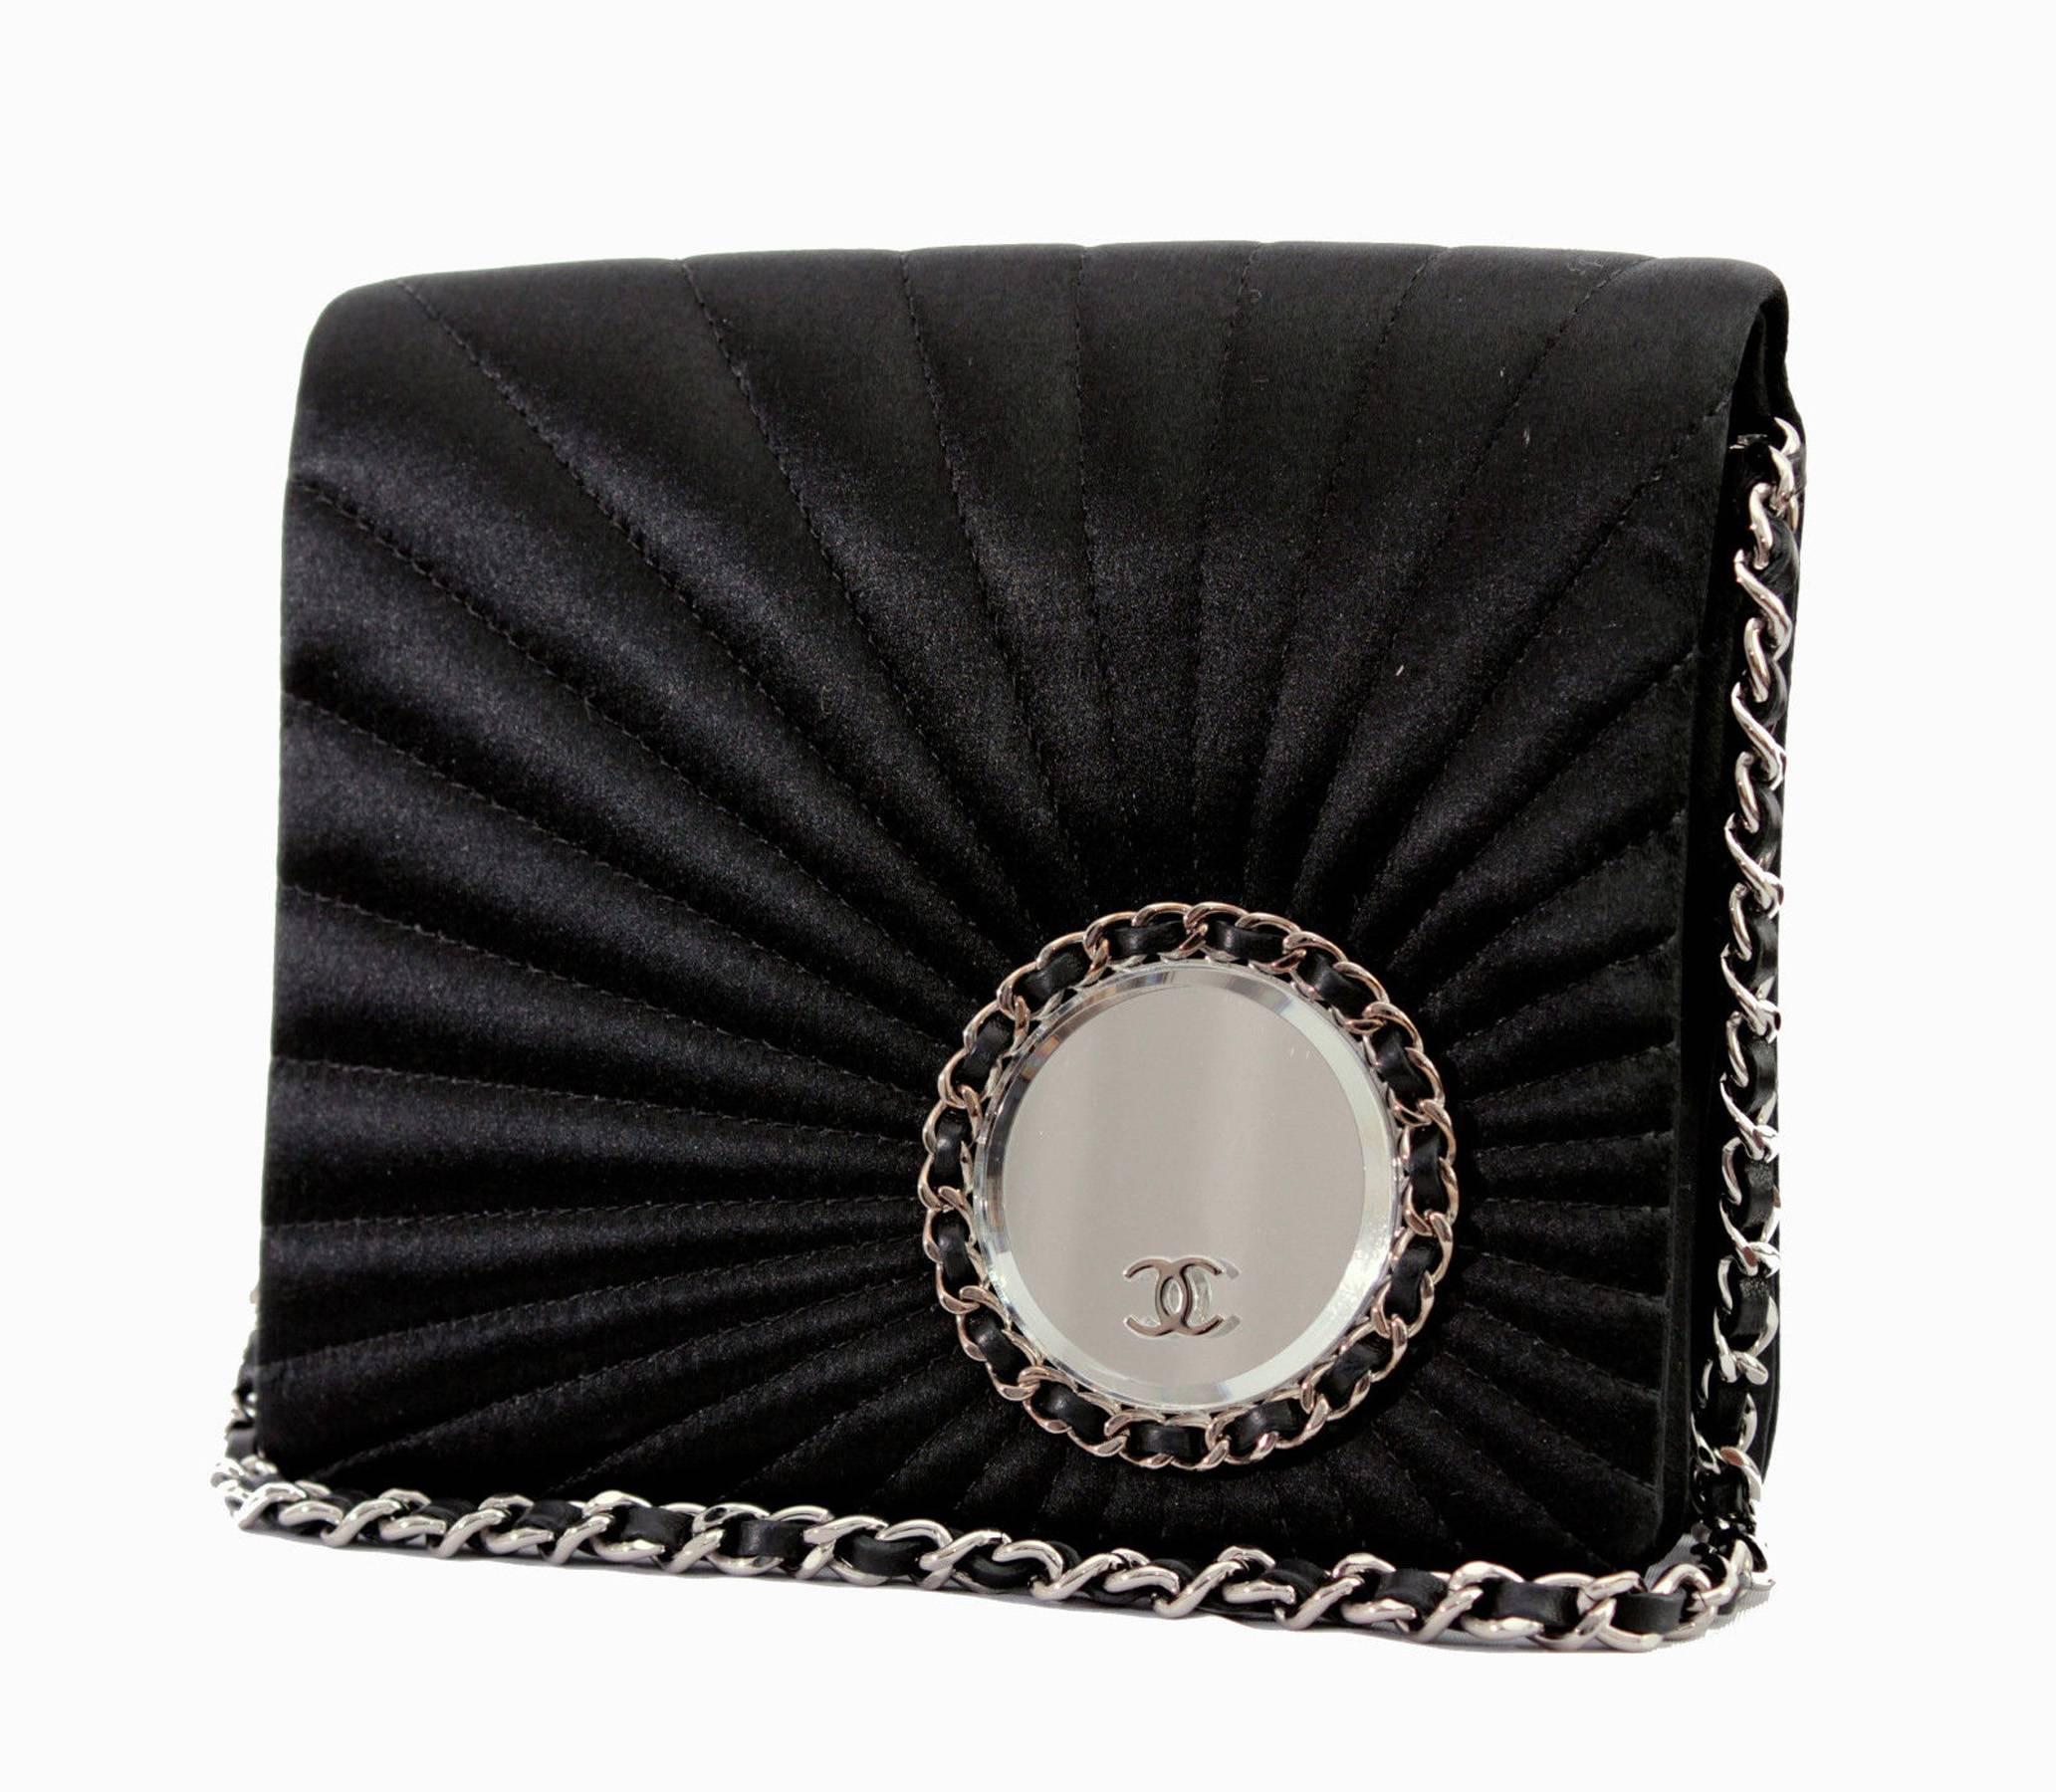 This silk satin evening bag is from Chanel, from their 2002 collection. Made from black silk satin, it features sun ray stitching on its front with a leather and silver chain round mirror attached with CC logo. Accordion-style, this bag is